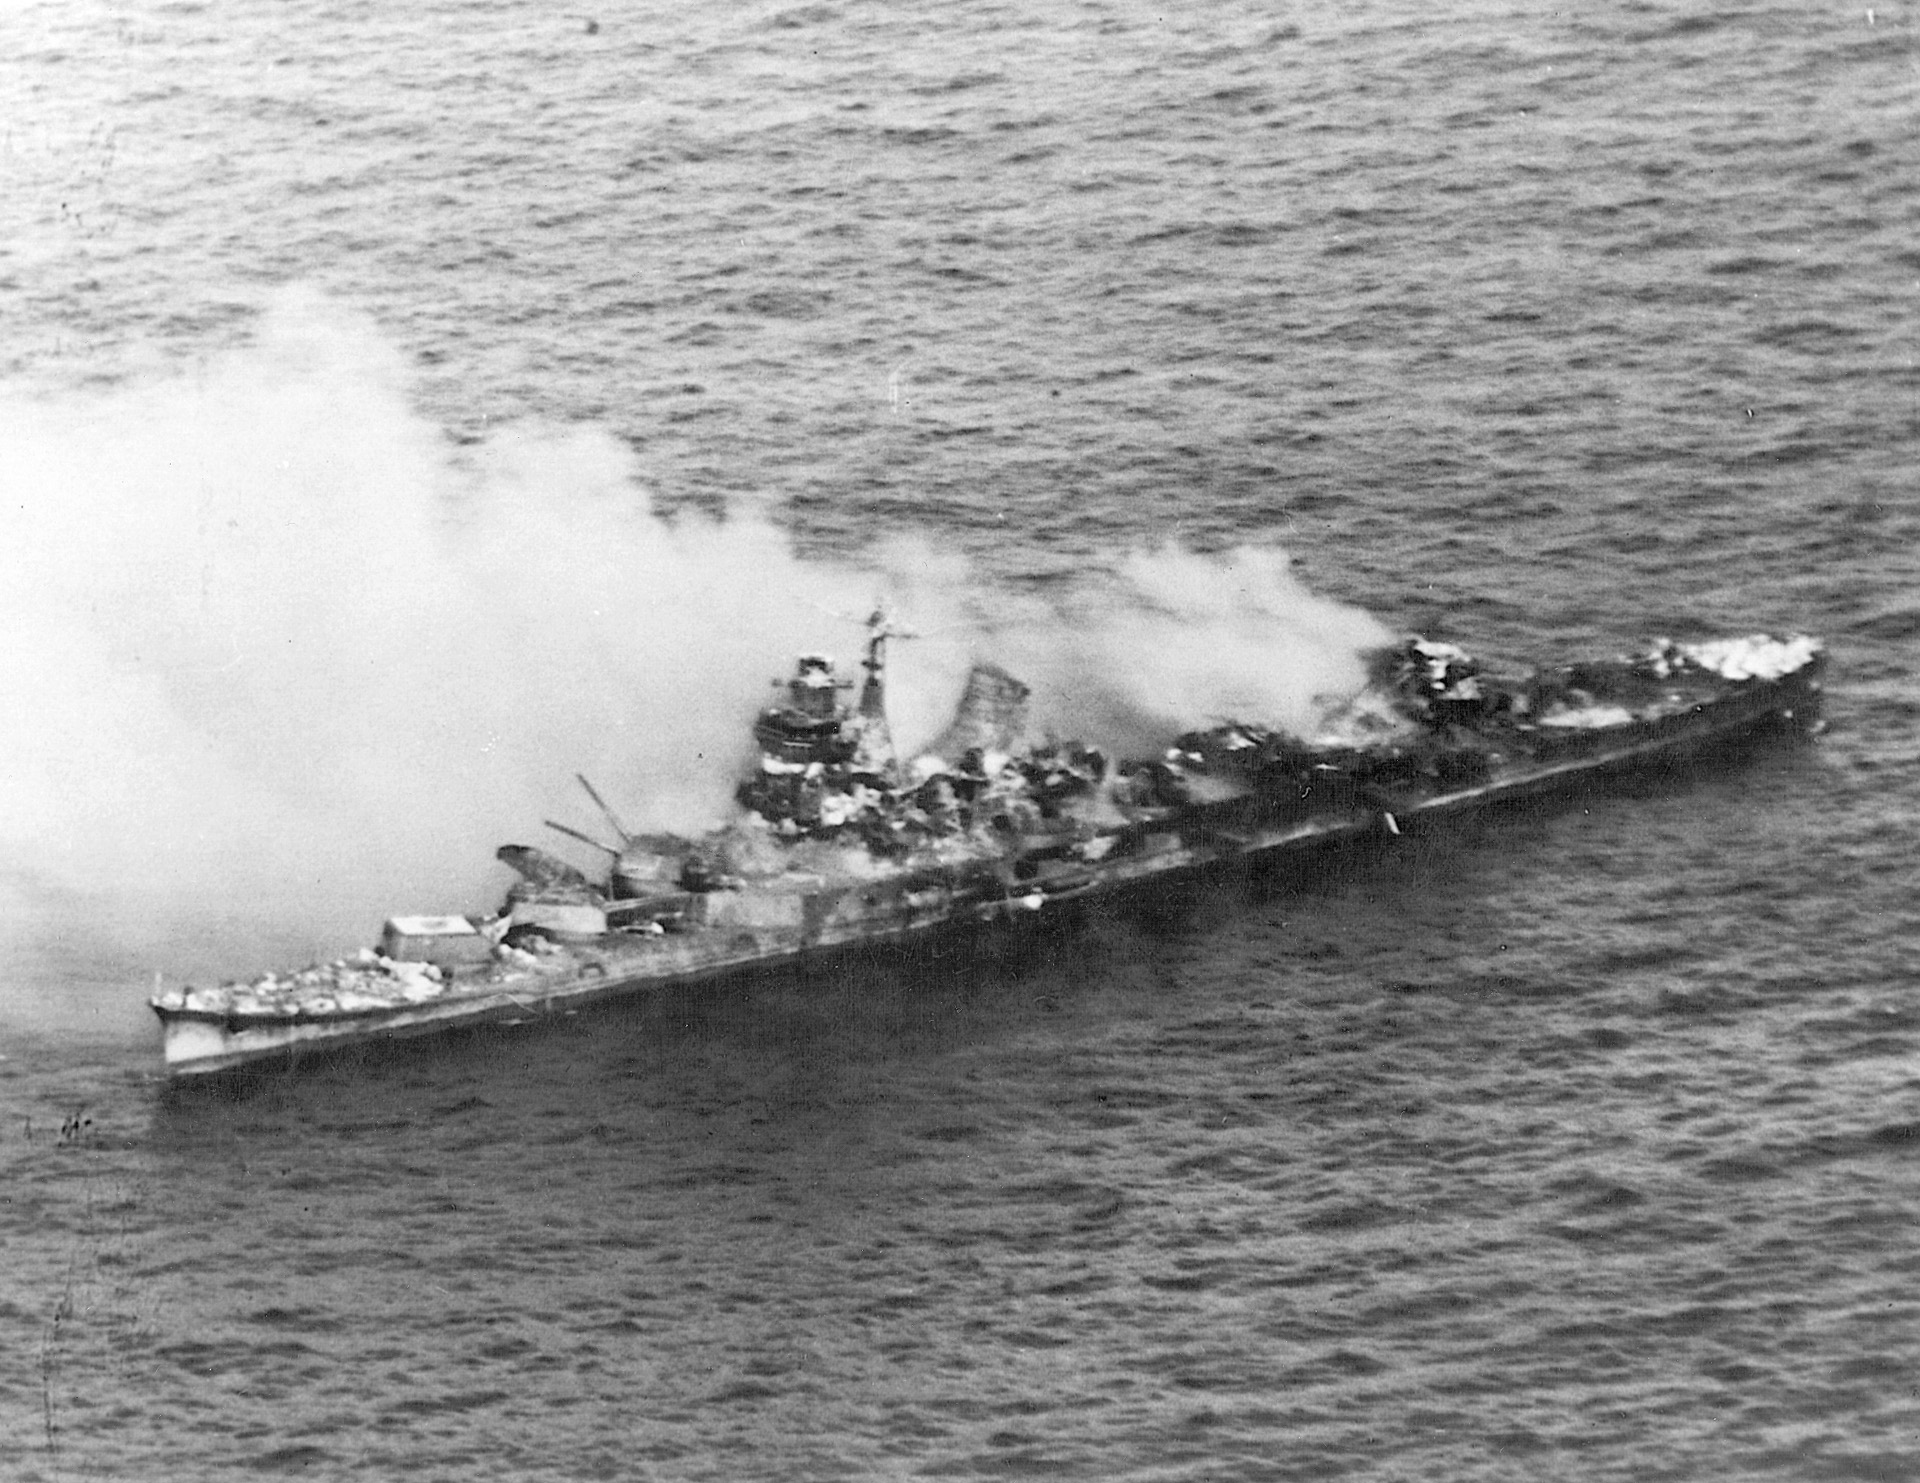 The Japanese heavy cruiser Mikuma wallows with her decks nearly awash after attacks by American aircraft.